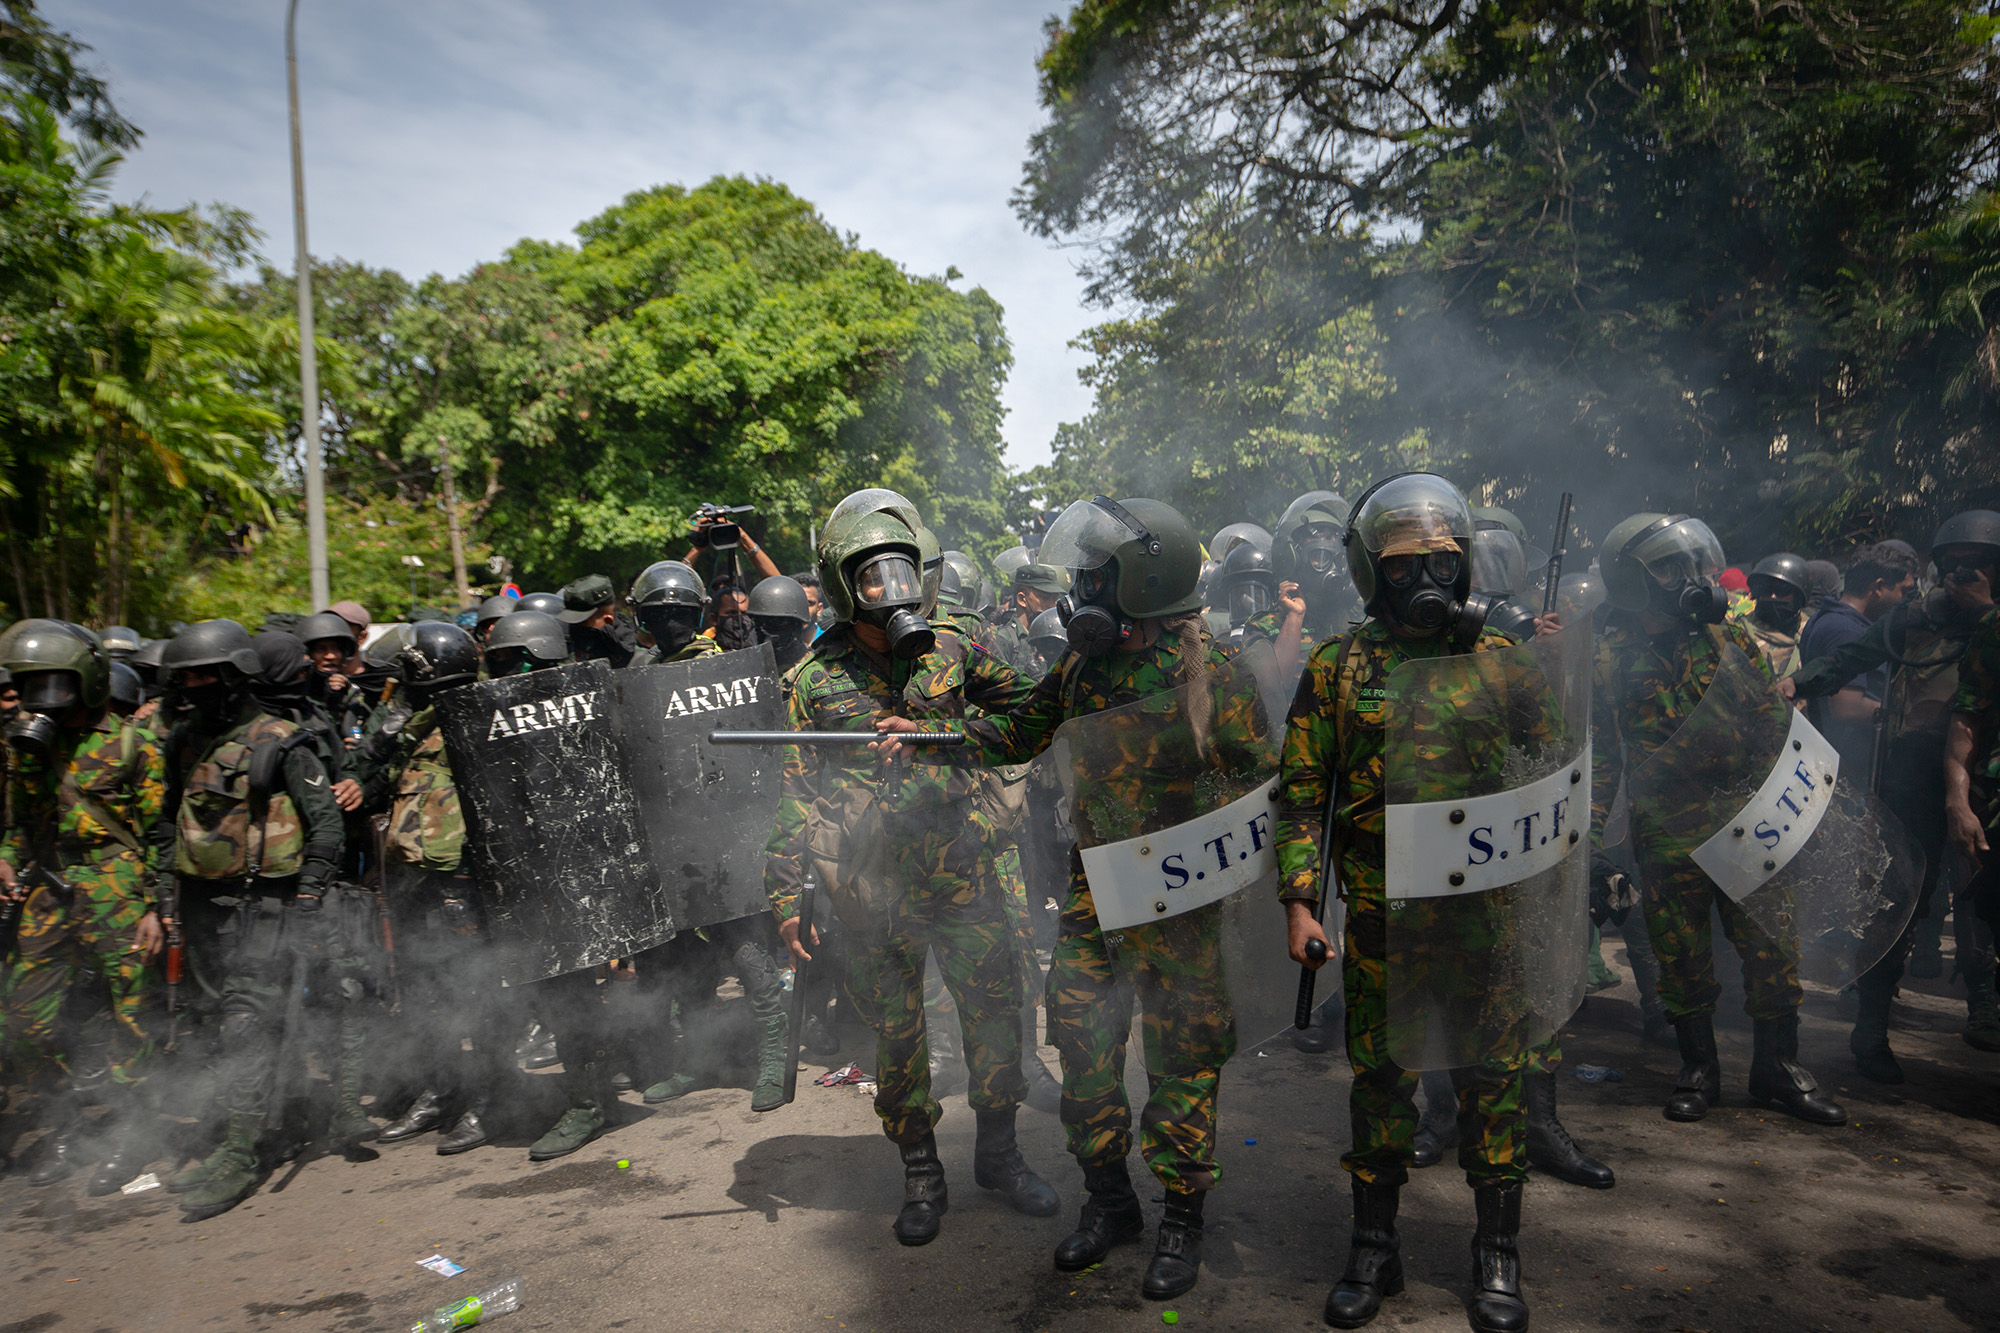 Military personnel in gas masks stand guard during a protest by people seeking the ouster of Sri Lanka's Prime Minister Ranil Wickremesinghe amid the ongoing crisis in Colombo on July 13.